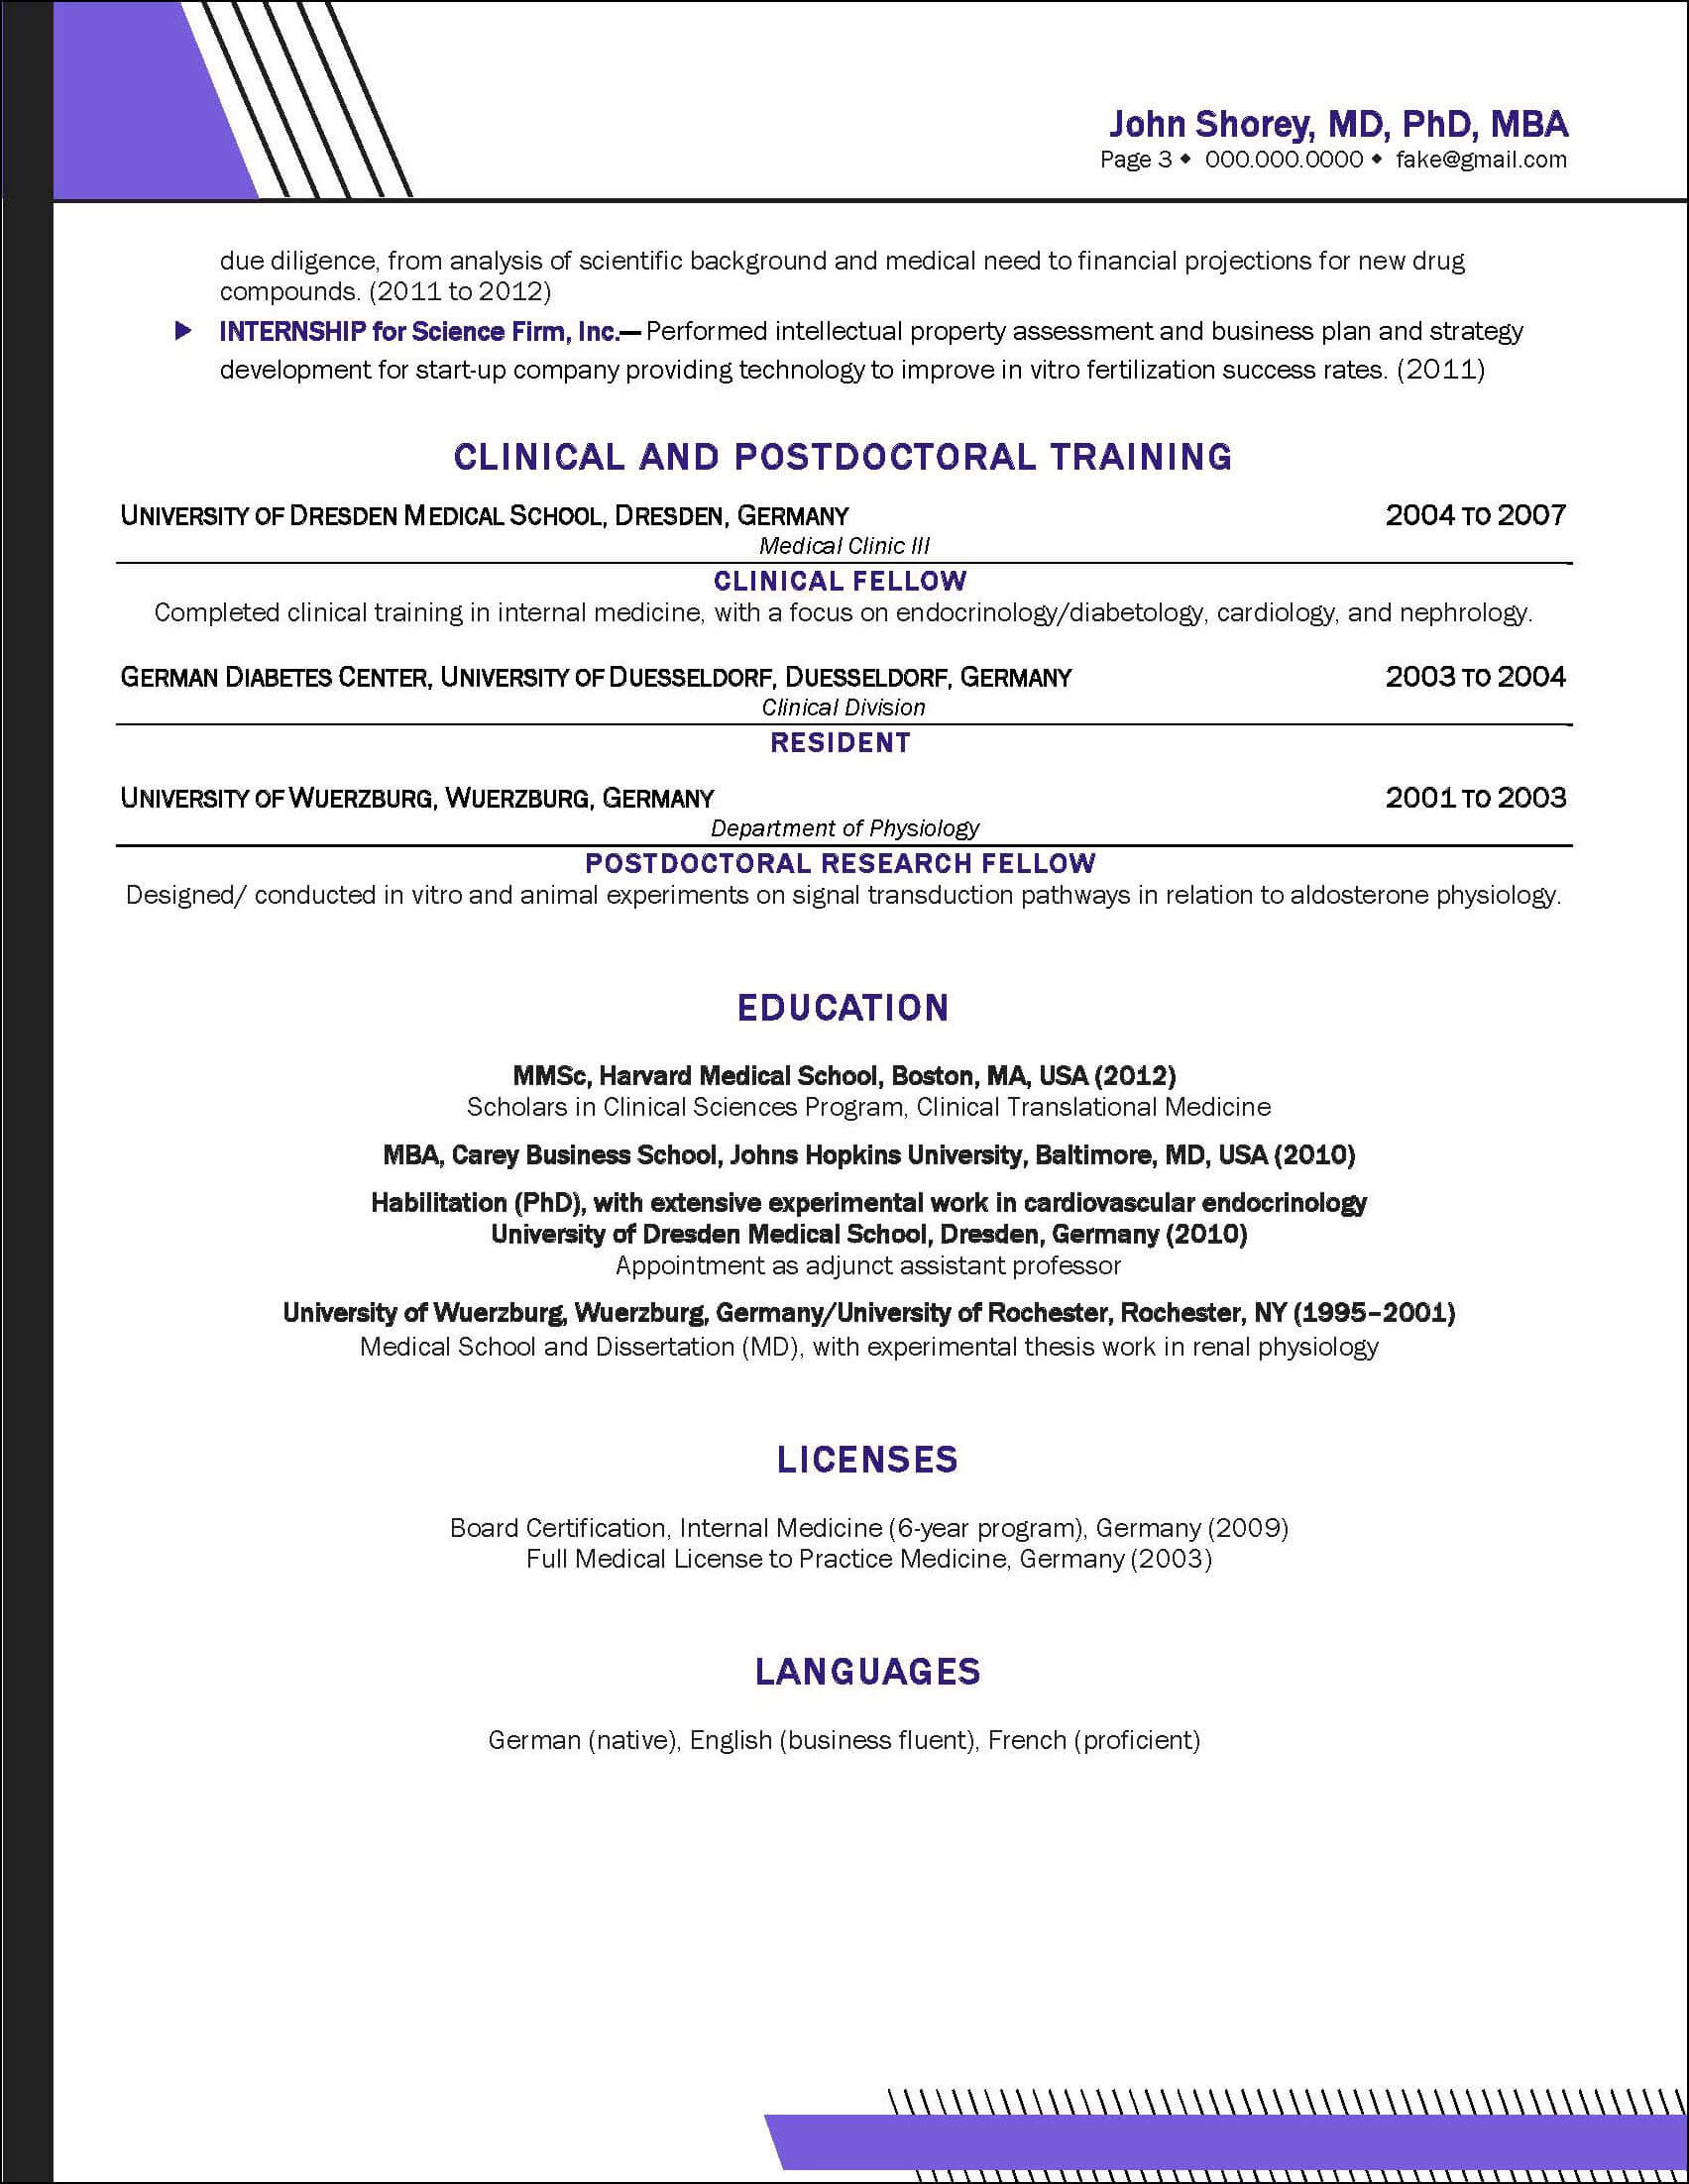 Resume Sample for Biotech Research assistant Jobs Biotech Resume Example – Distinctive Career Services